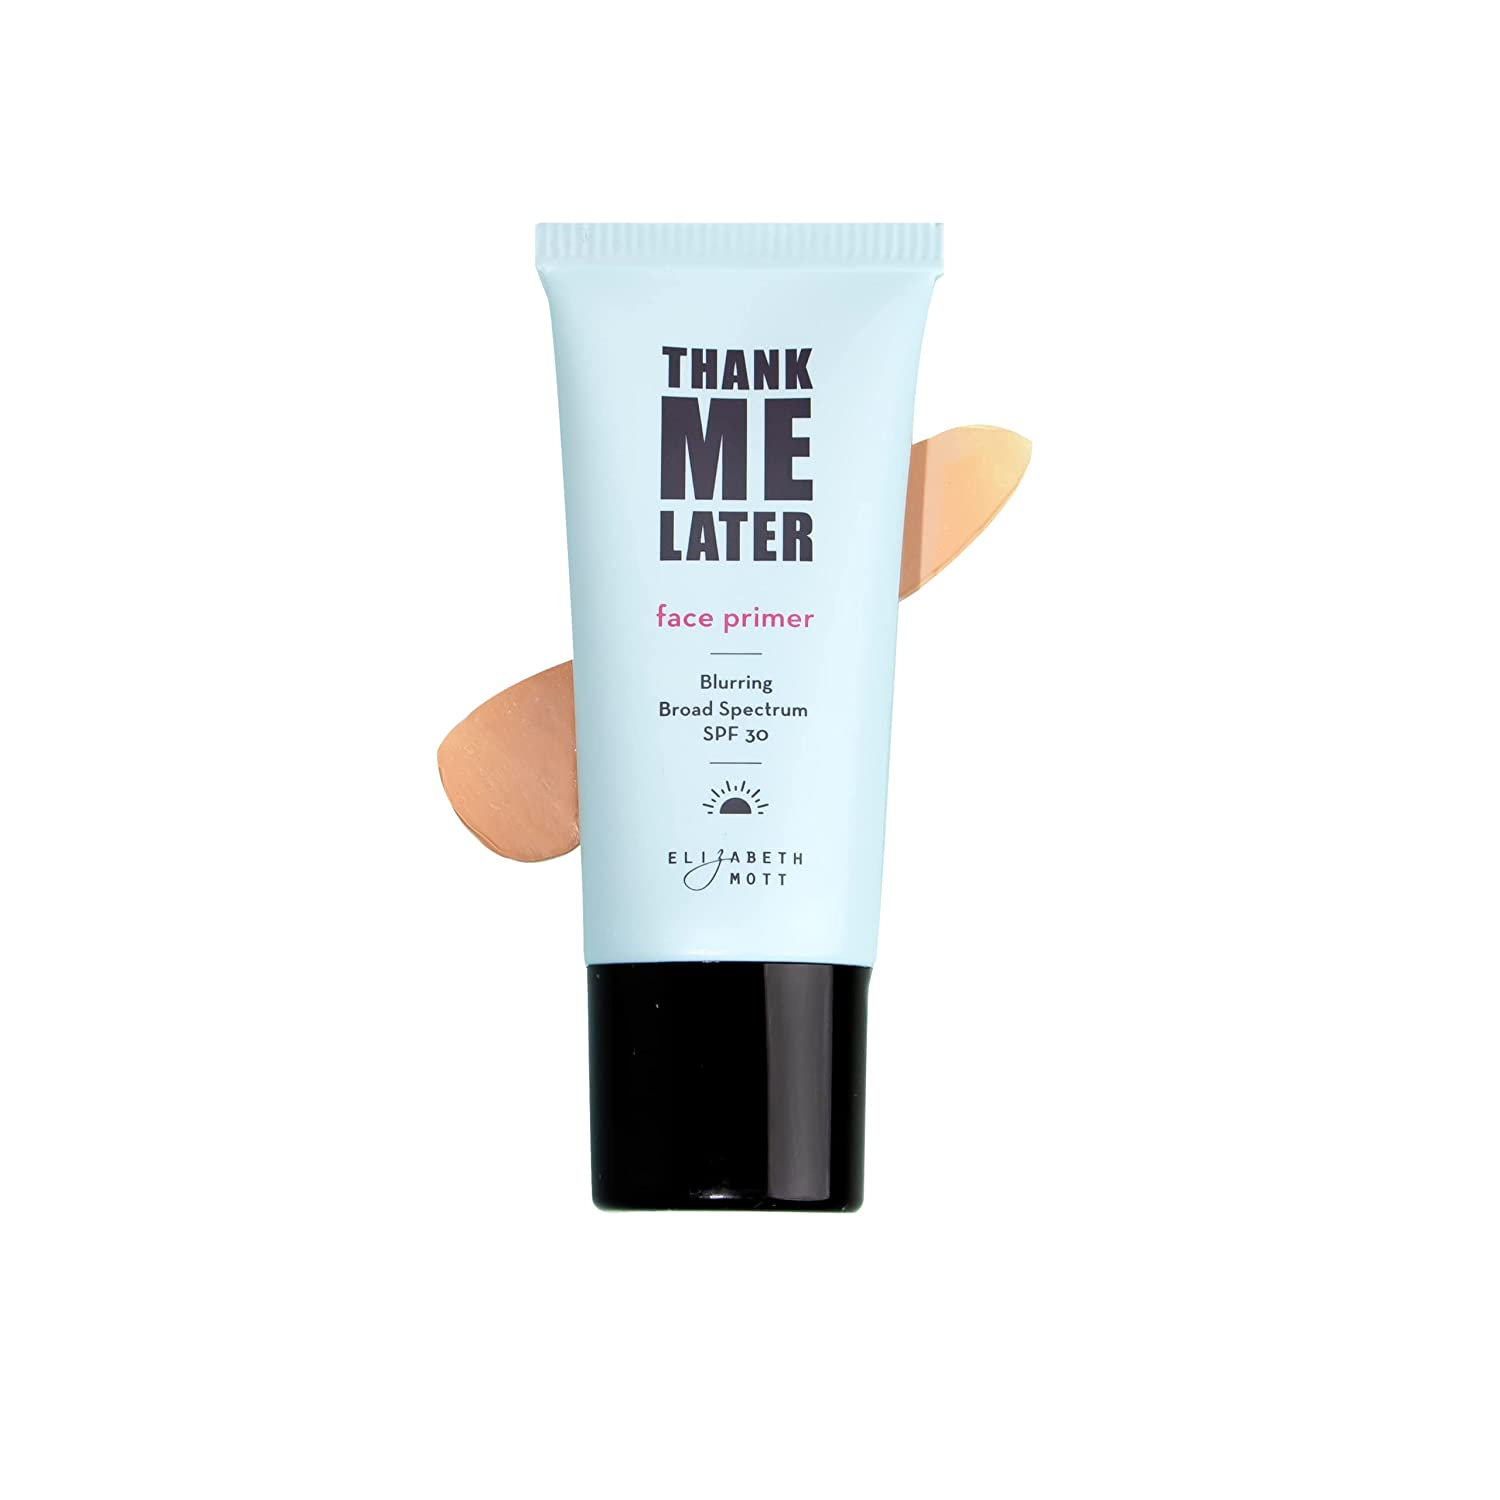 Elizabeth Mott Thank Me Later Blurring Face Primer with SPF30 that Sun Protection All Day Makeup Wear Pore Minimizing, Softens Fine Lines and Wrinkles for Velvet Skin Great For All Ages, 30mL